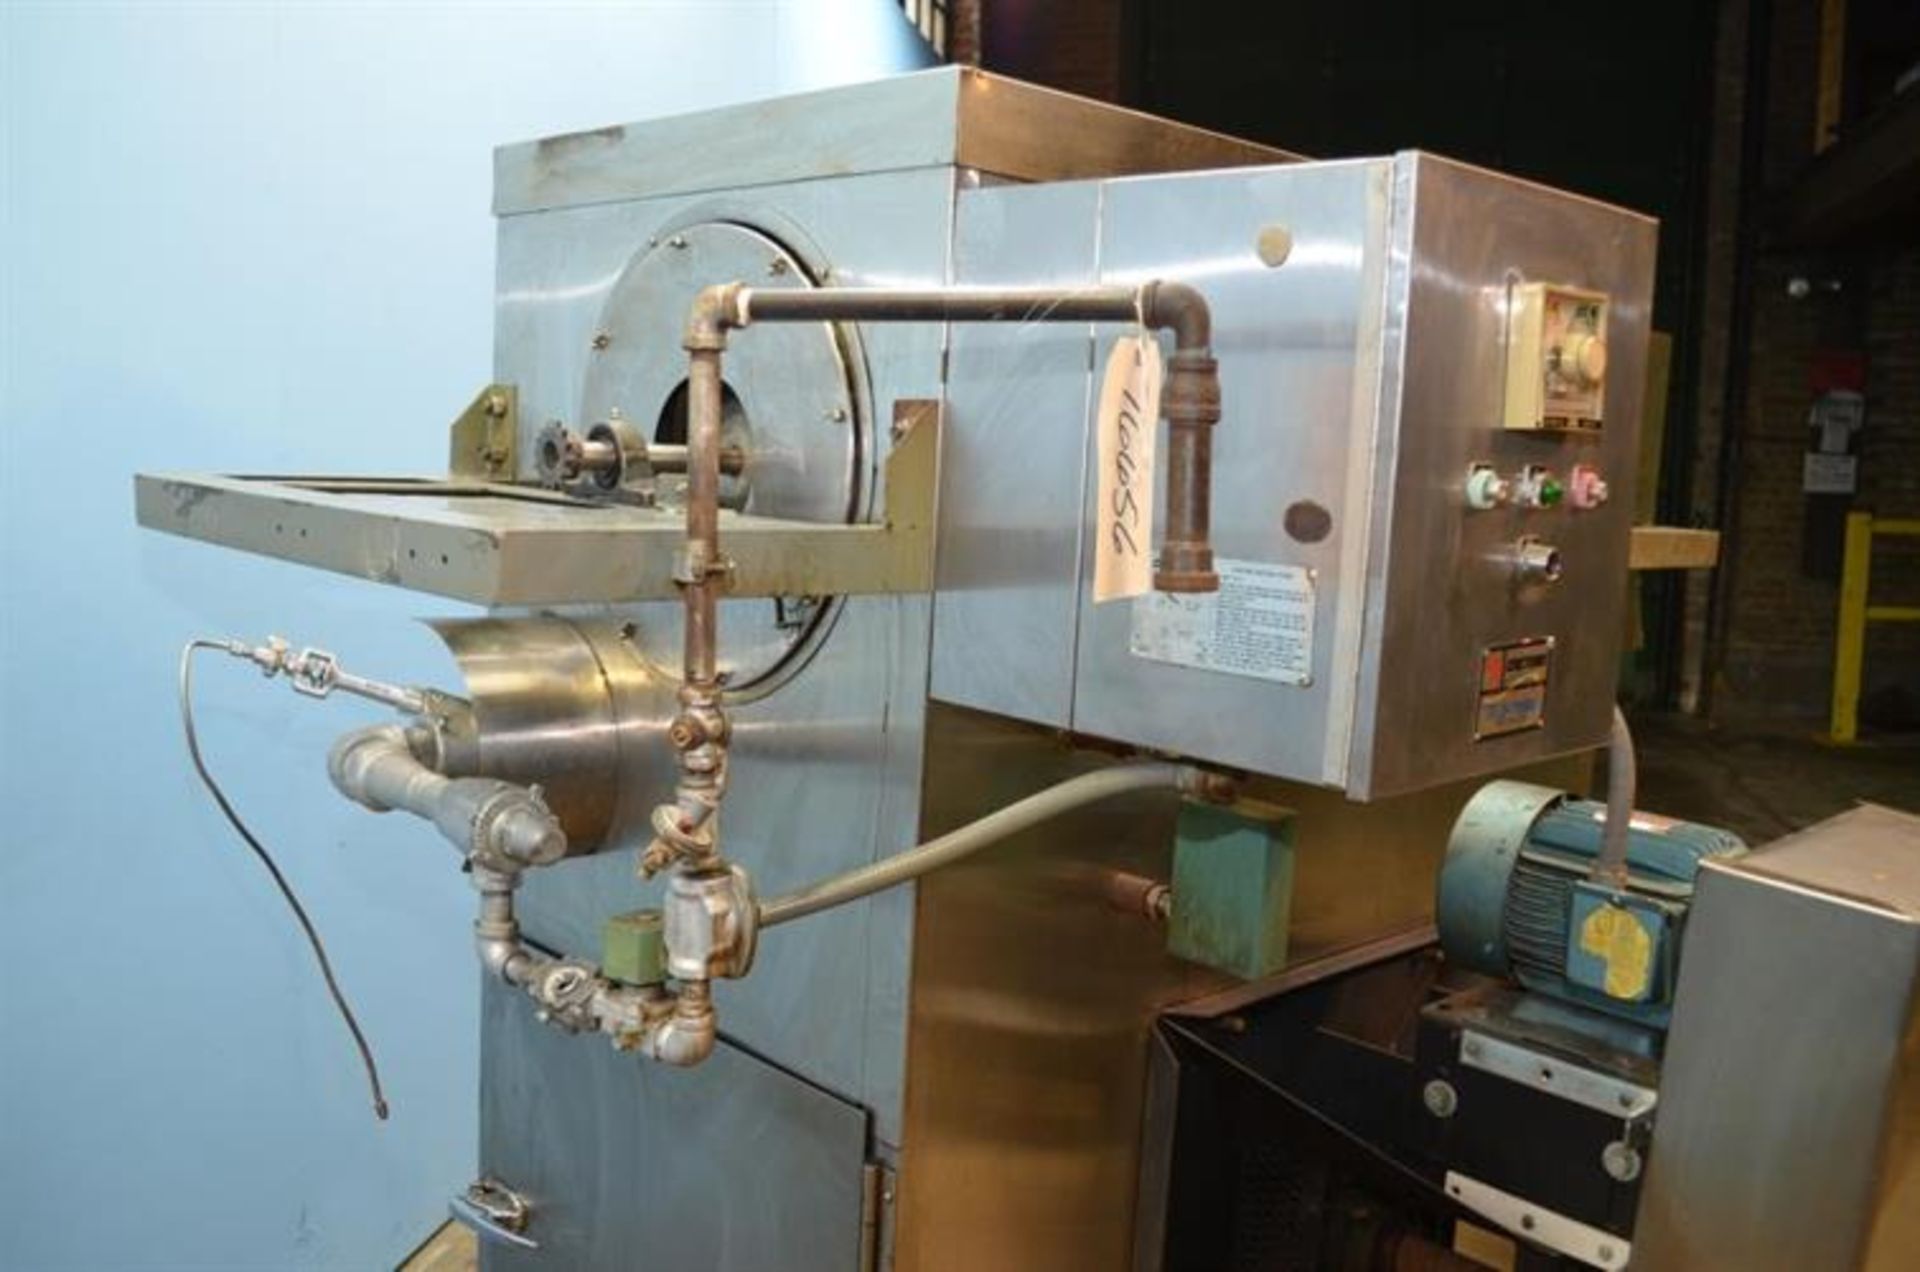 Cretors FT200 200 lb/hr Continuous Dry Popper - Natural gas fired - 120,000 btu/hr - Serial#91031063 - Image 3 of 13